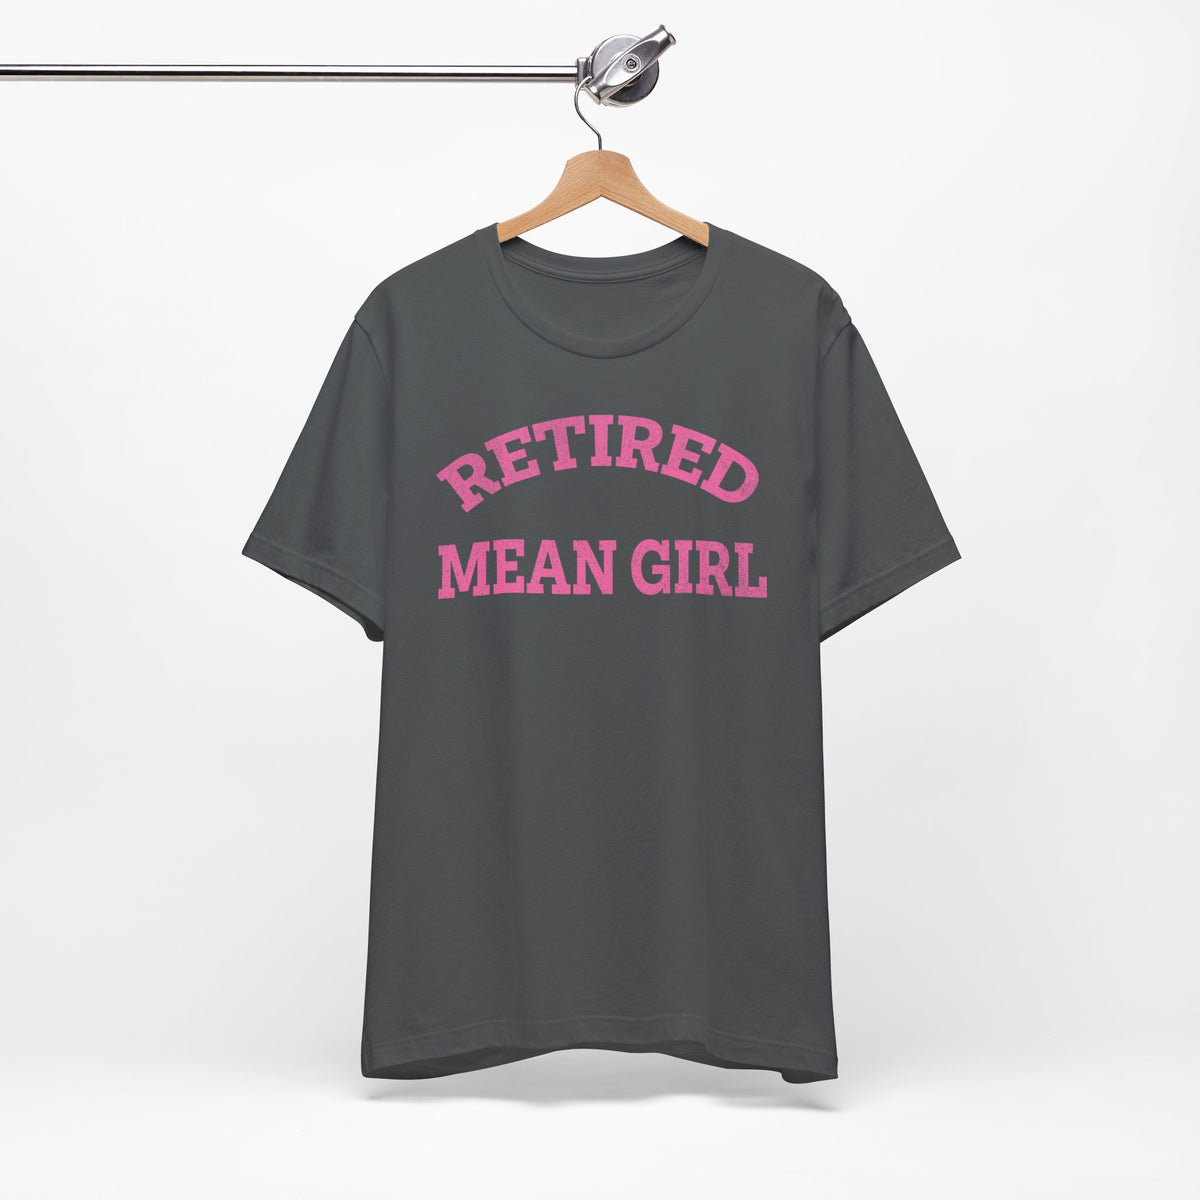 Retired Mean Girl Funny Graphic Tee